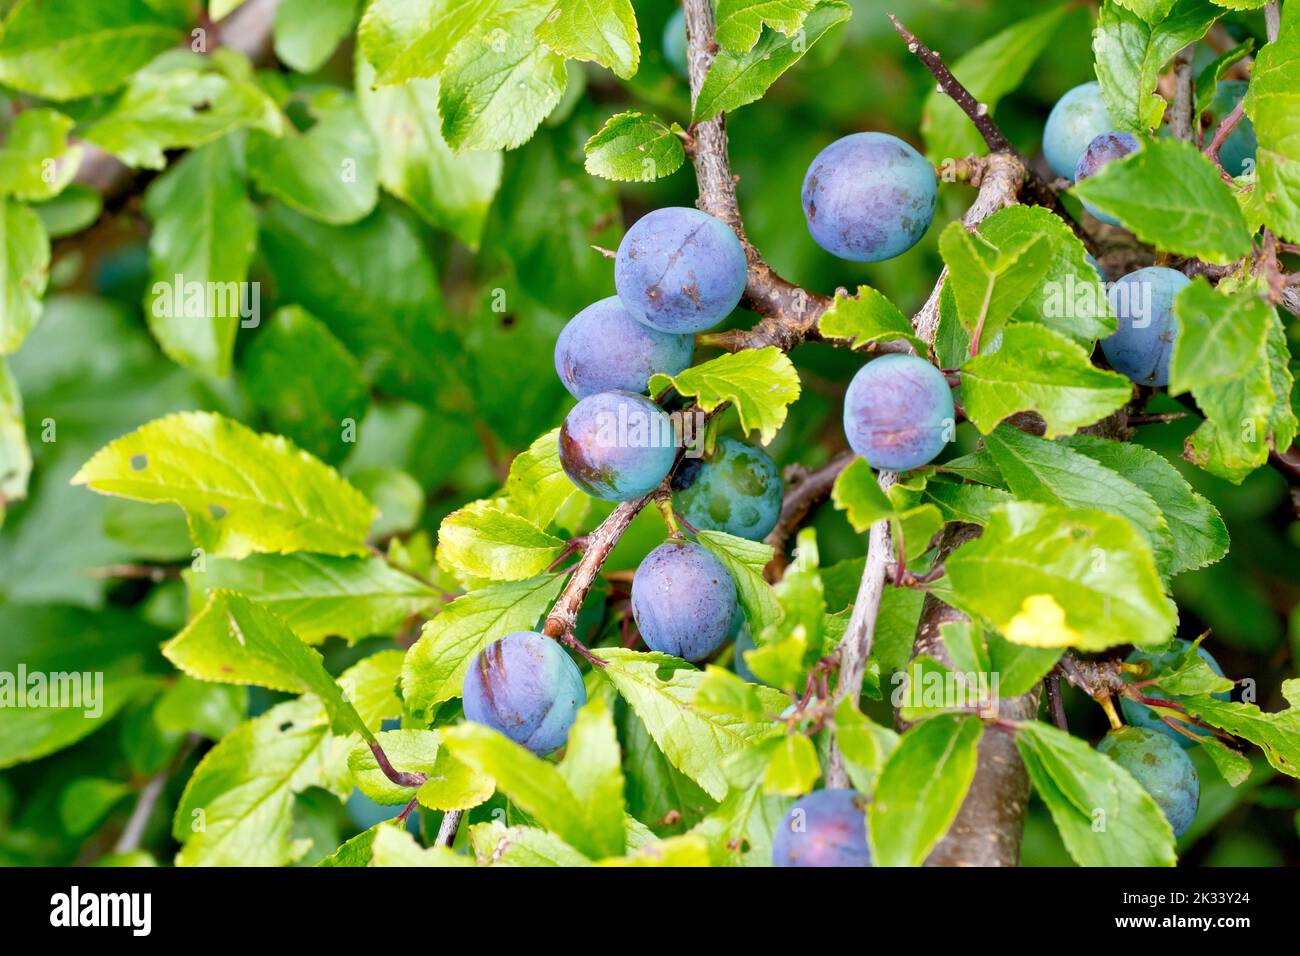 Sloe or Blackthorn (prunus spinosa), close up of the blue berries, fruits, or sloes of the shrub hiding amongst the leaves. Stock Photo